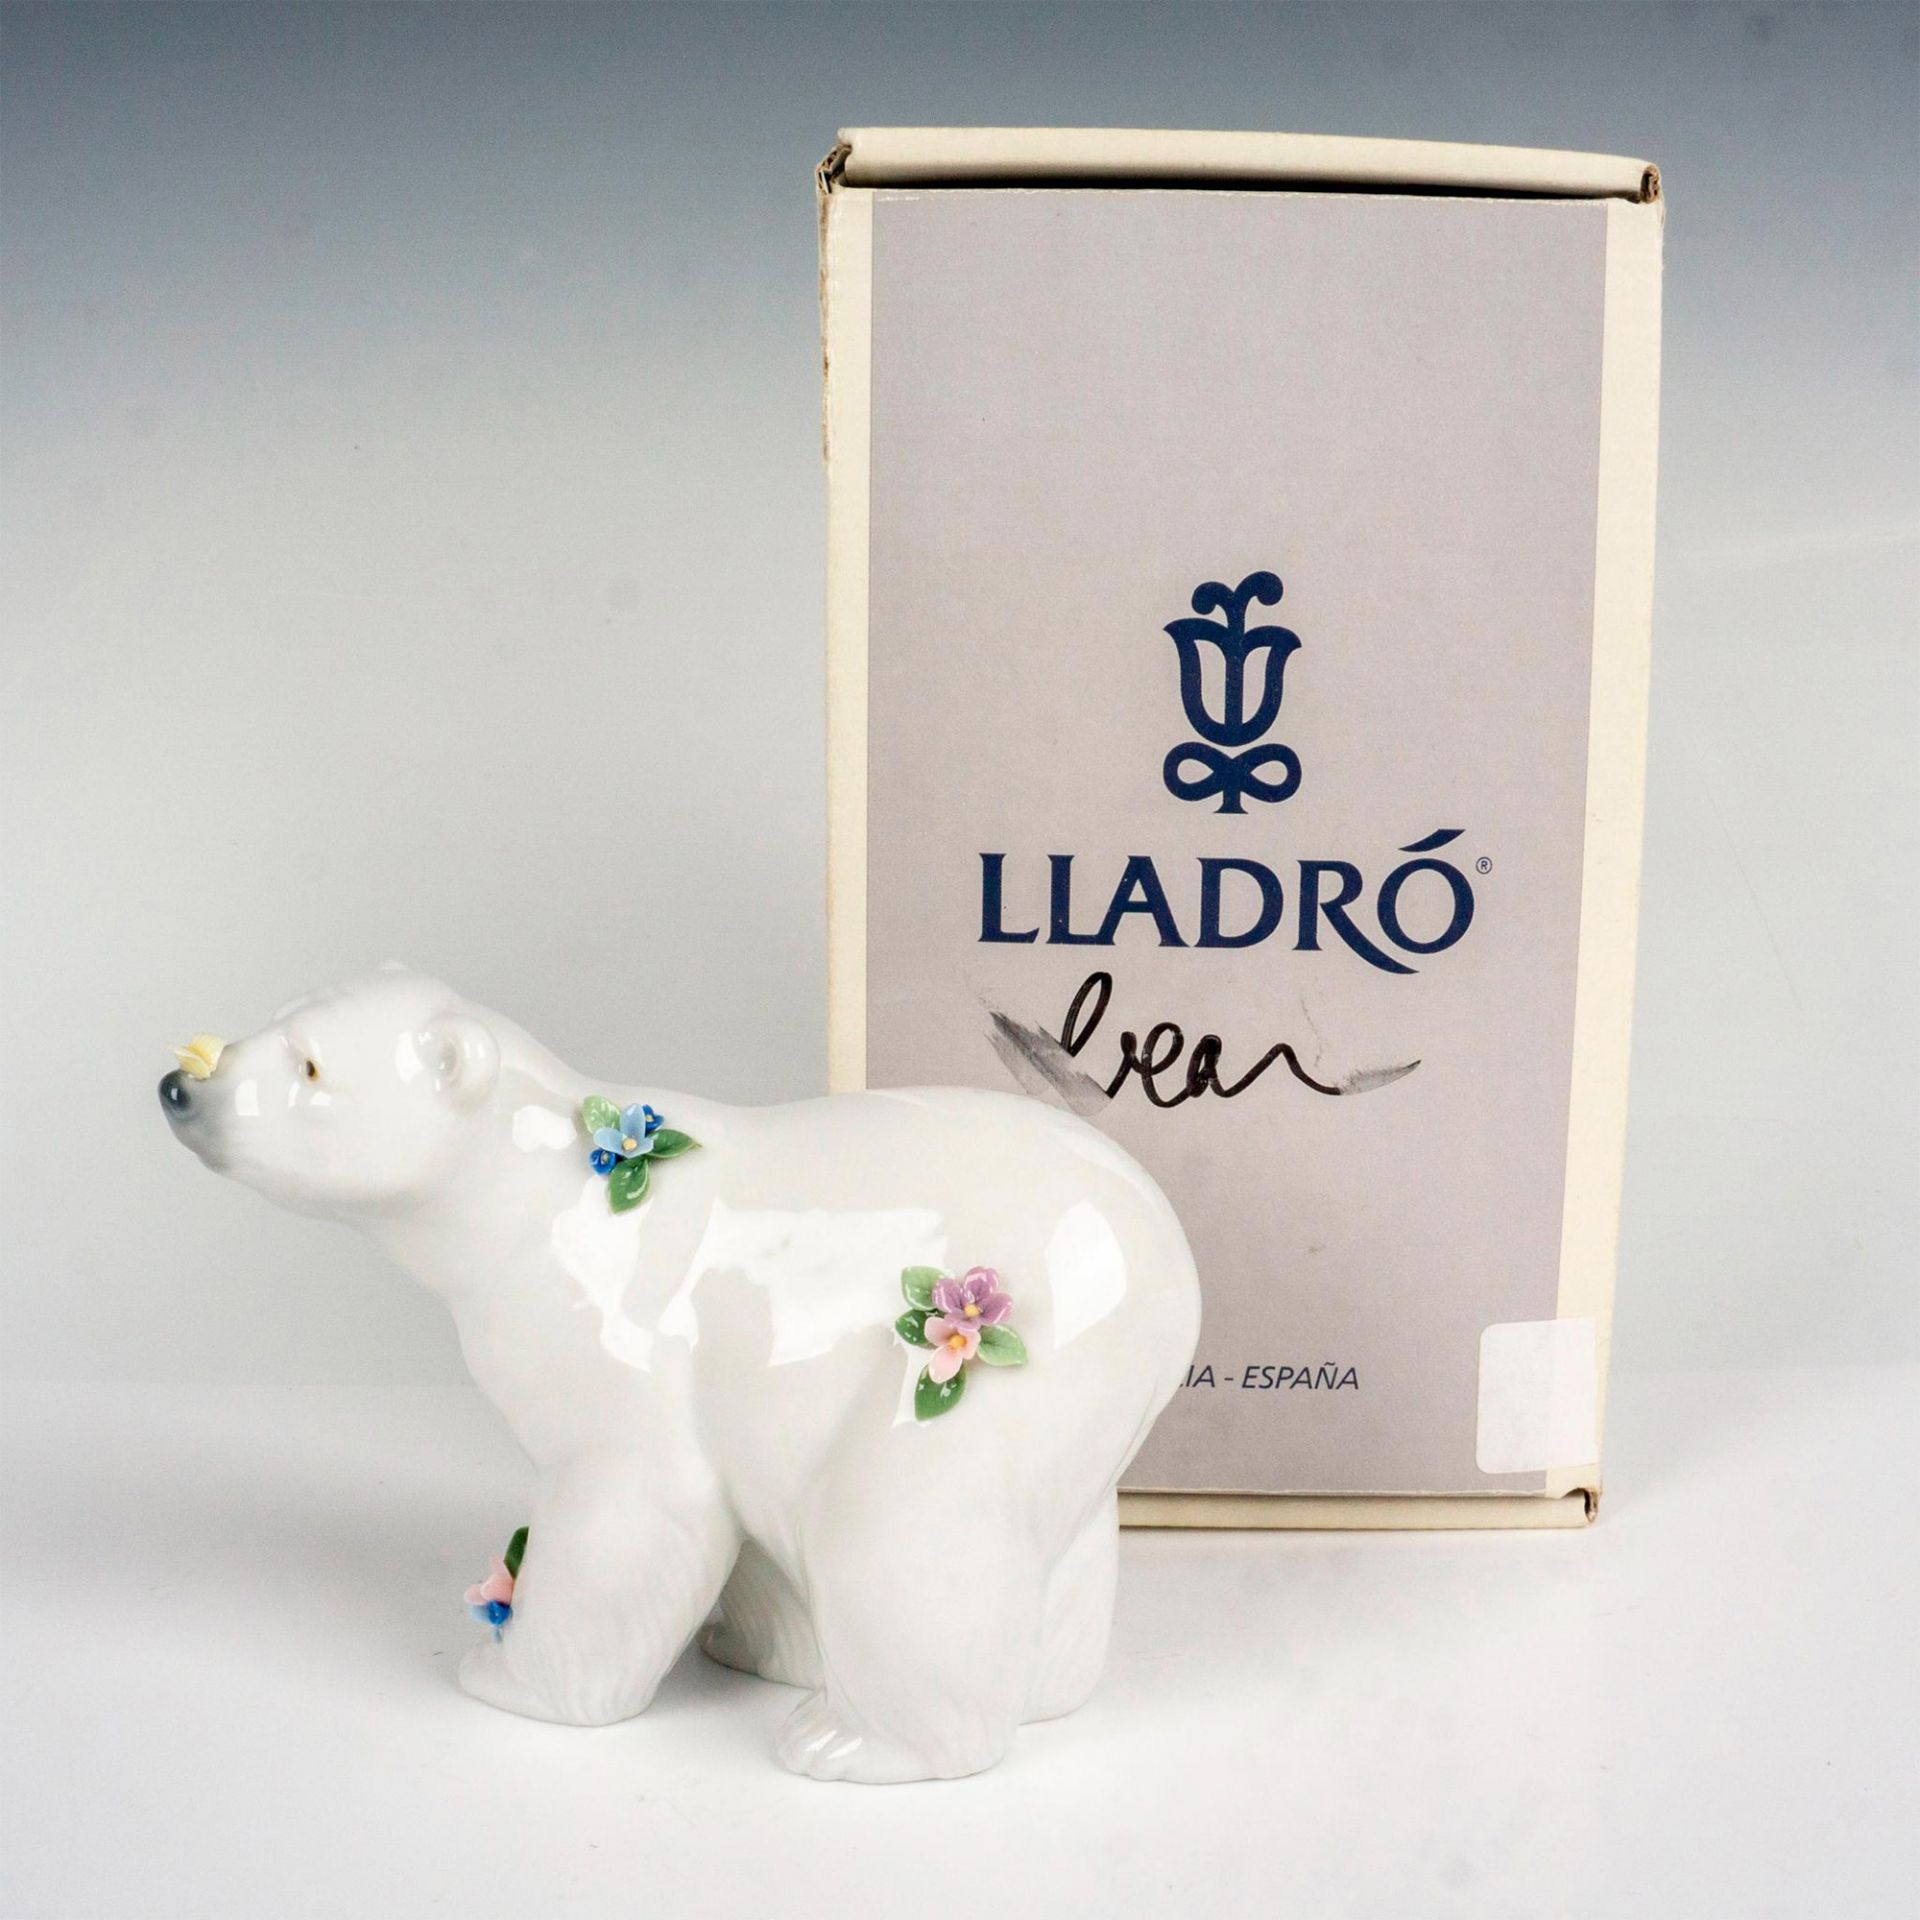 Lladro Porcelain Figurine, Attentive Polar Bear with Flowers 1006354 - Image 4 of 4